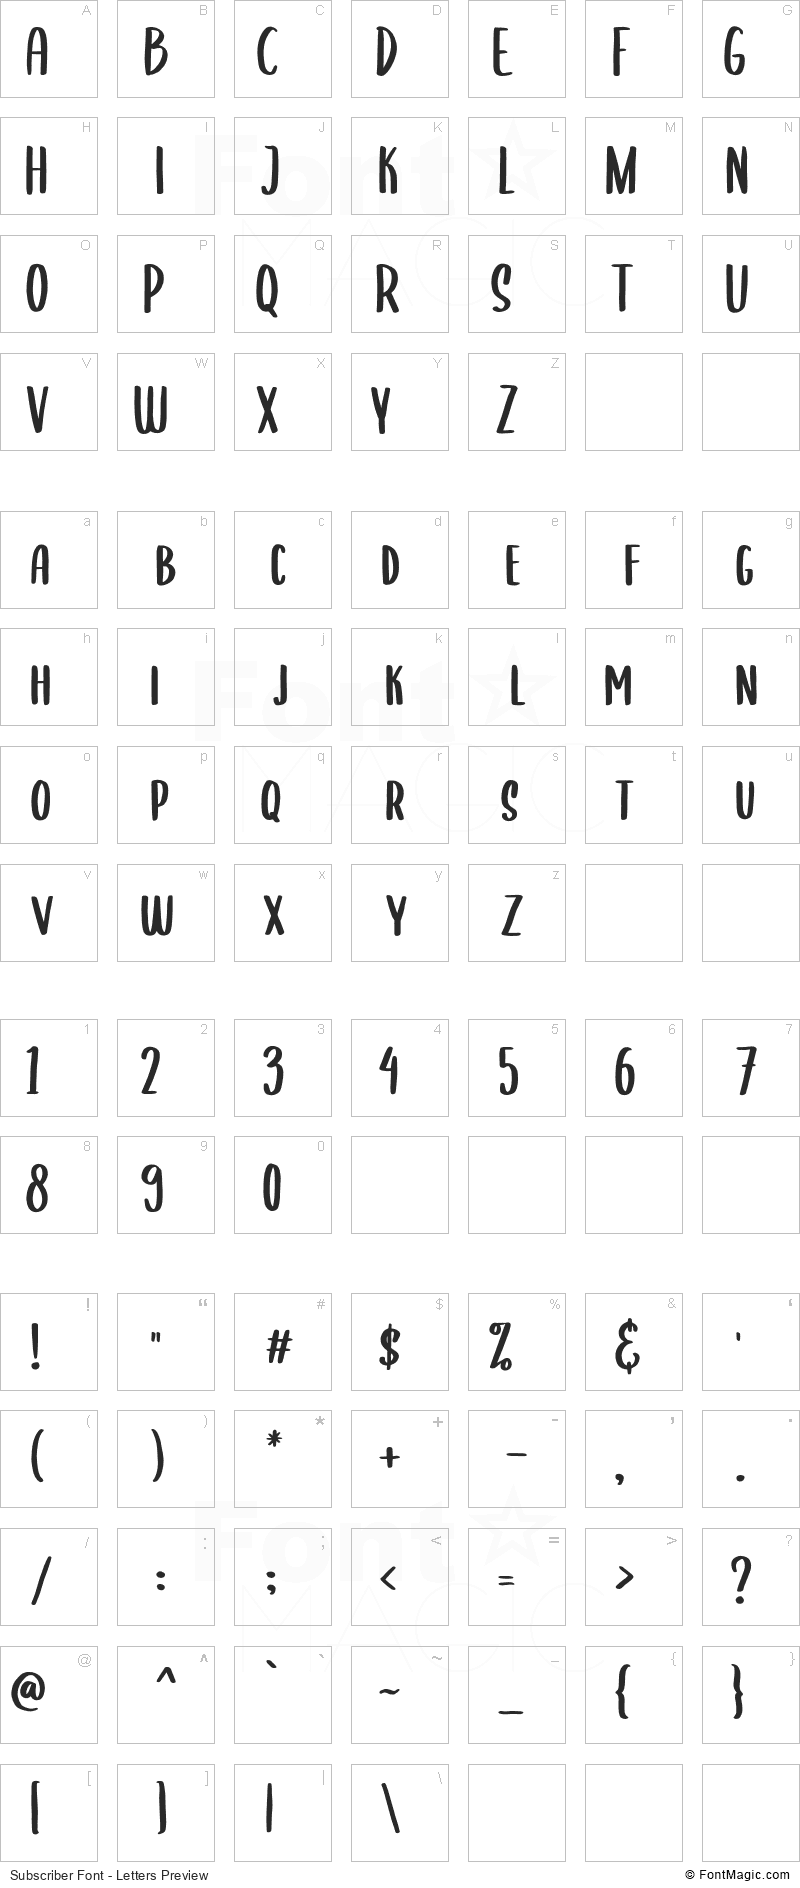 Subscriber Font - All Latters Preview Chart